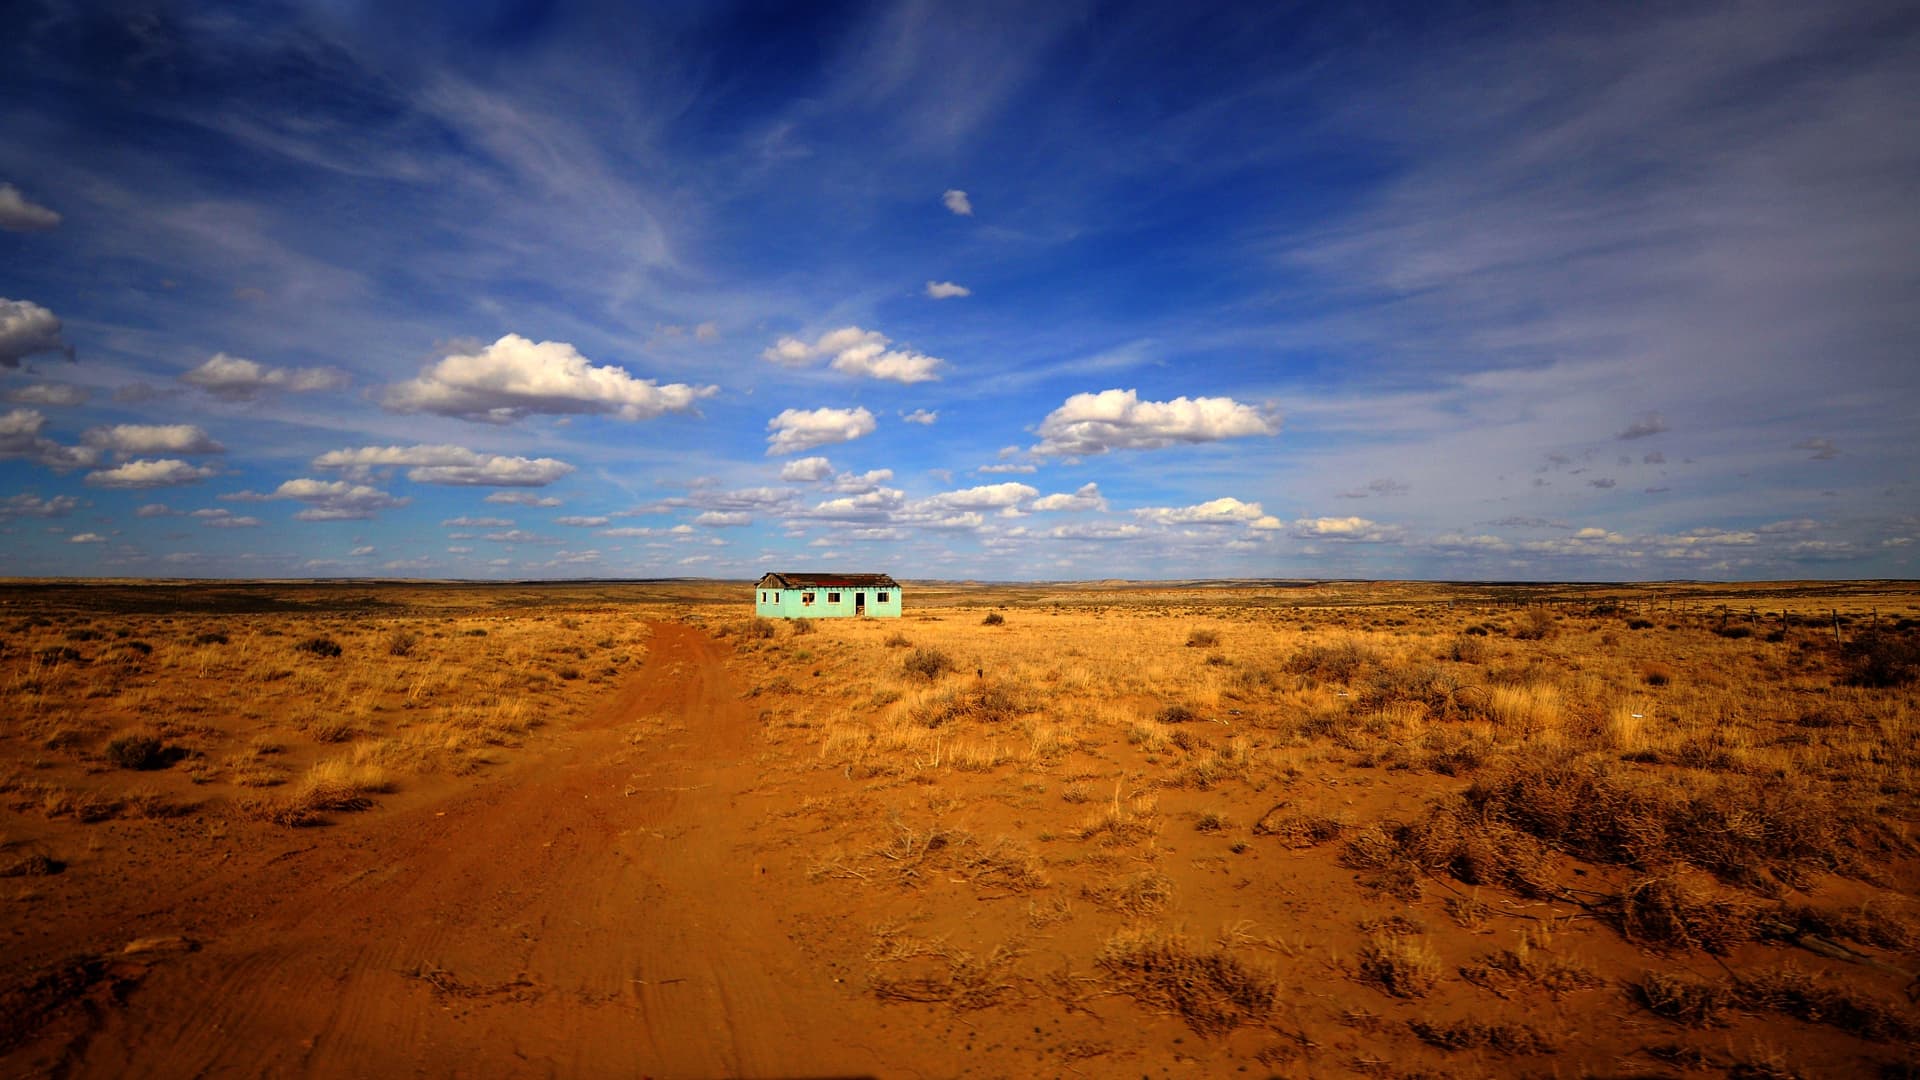 An abandoned home stands alone on the open desert near Chaco Culture National Historic Park in northern New Mexico.